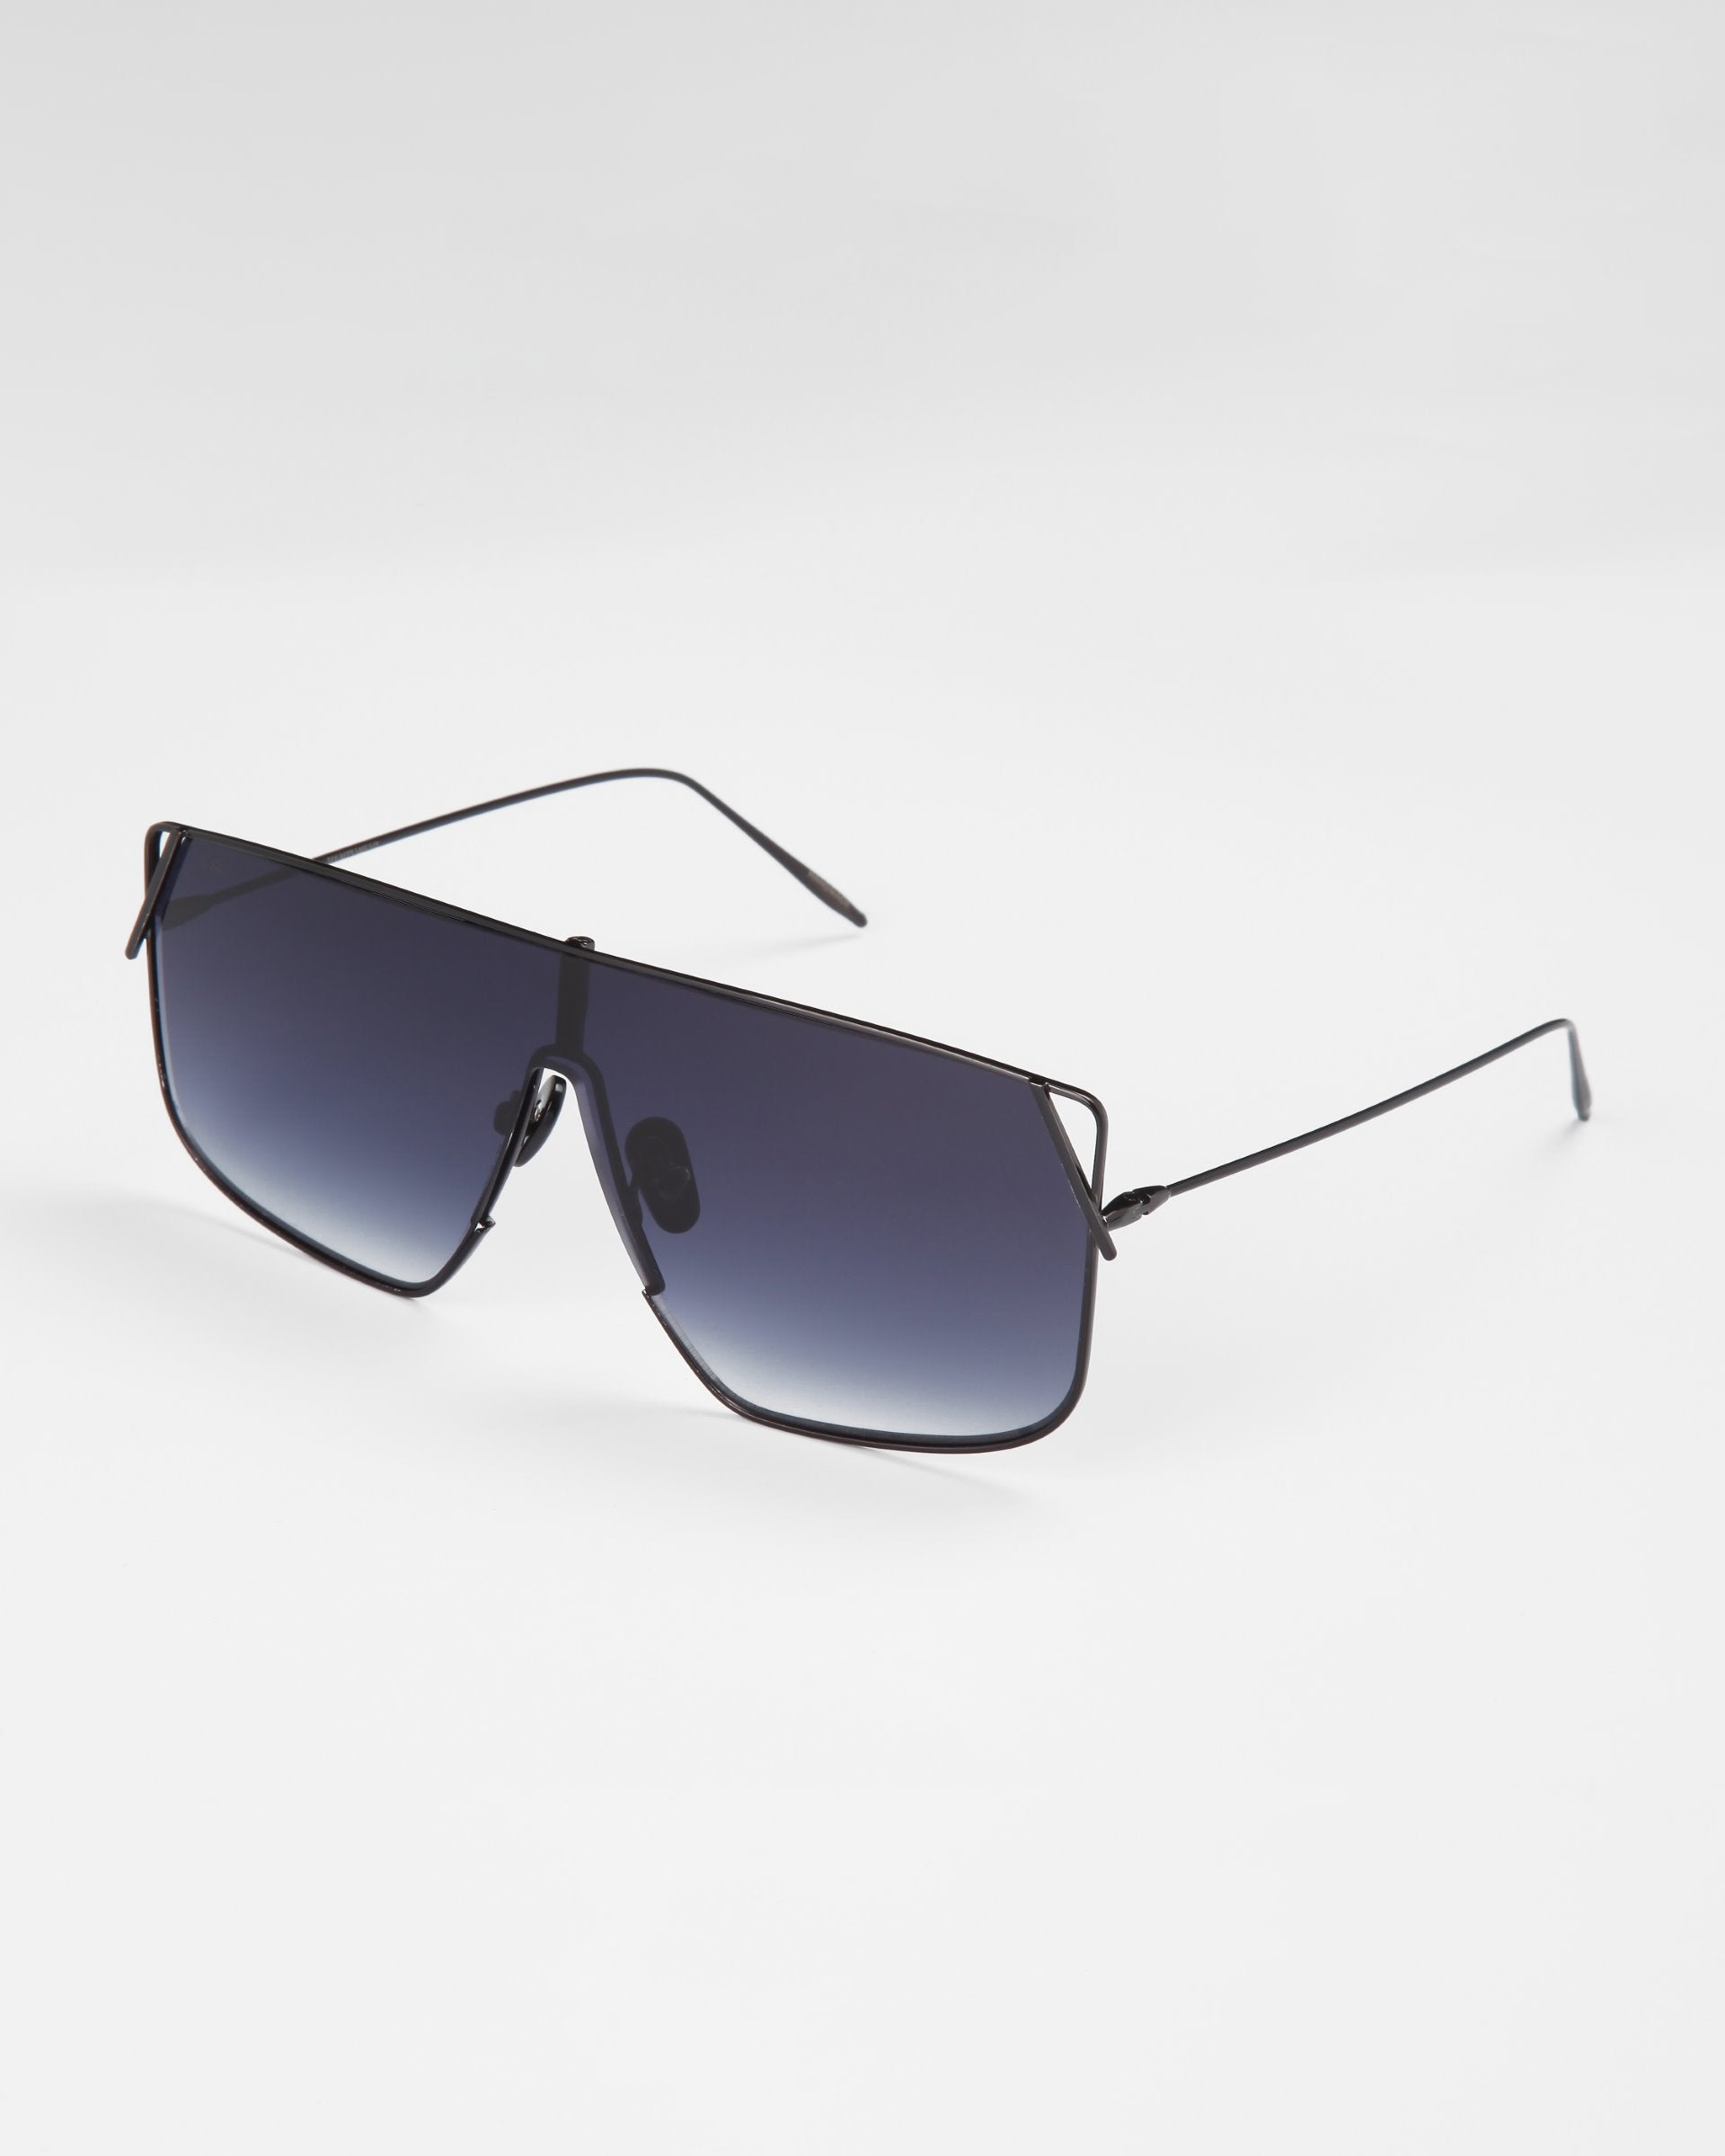 A pair of black, oversized square Horizon sunglasses with dark-tinted lenses, stainless steel frames, and thin metal arms resting on a white surface. These stylish glasses from For Art&#39;s Sake® offer both UVA &amp; UVB protection.